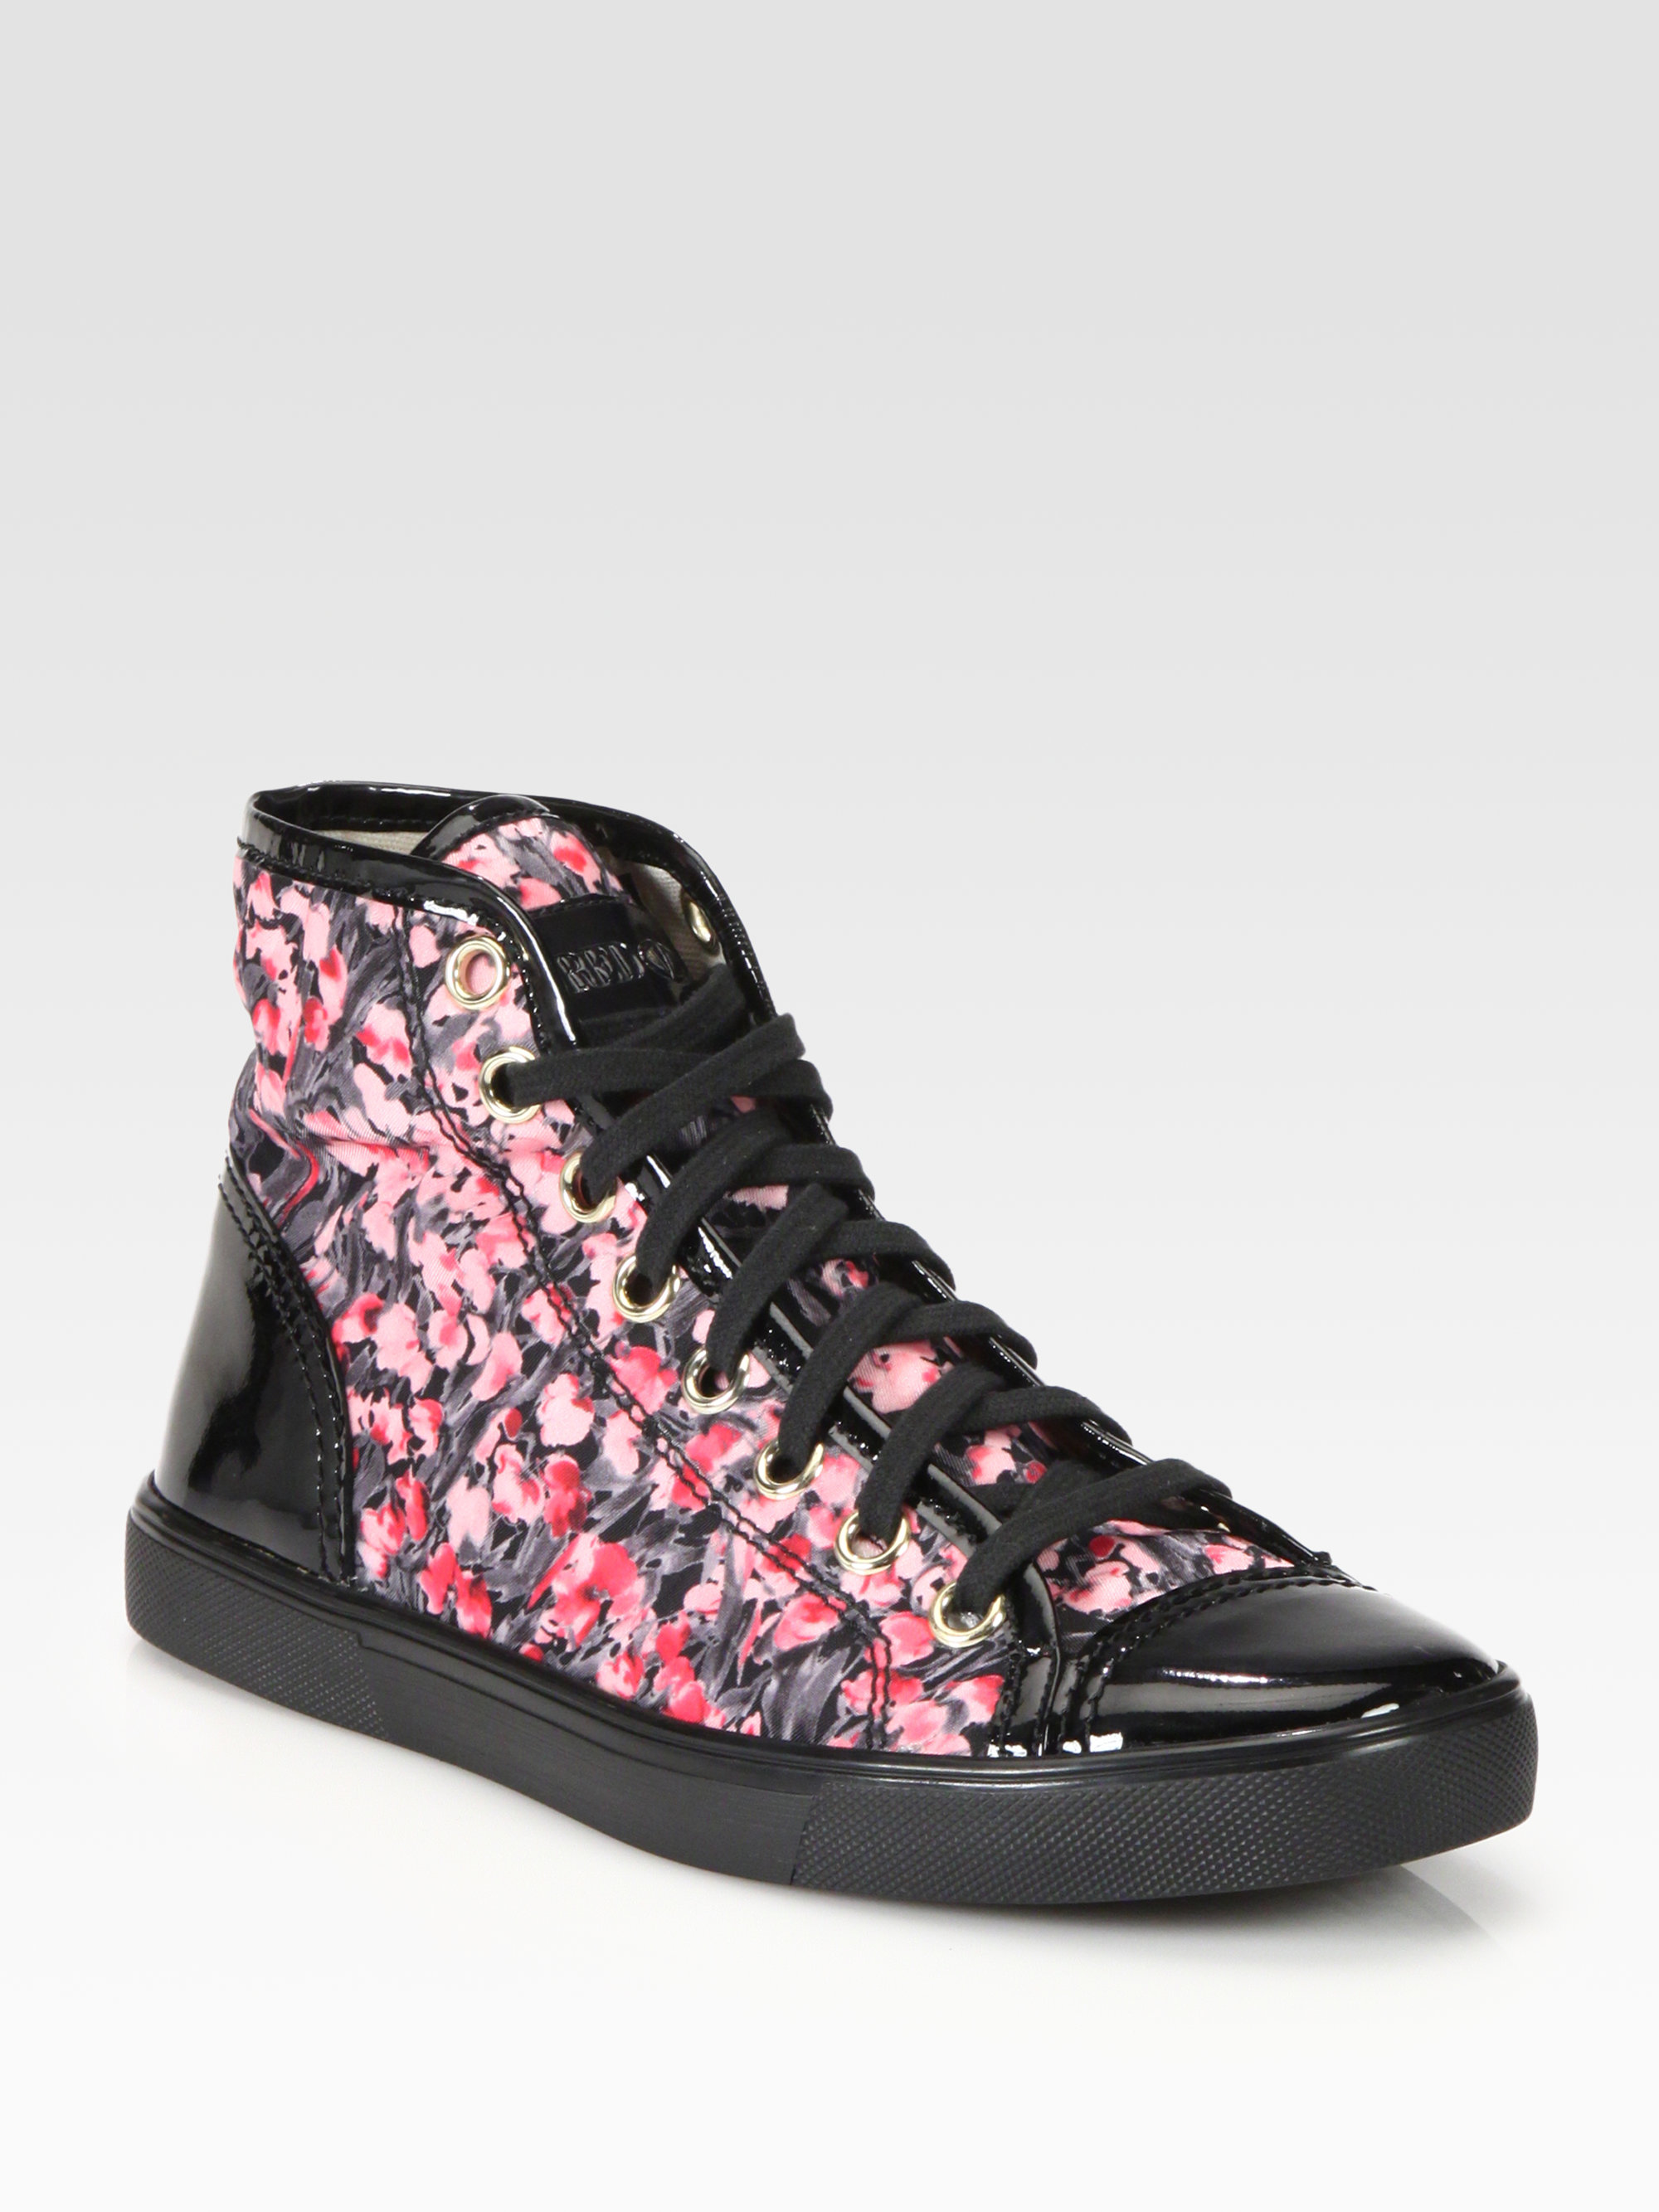 RED Valentino Floral Lace Up High Top Sneakers in Black - Lyst